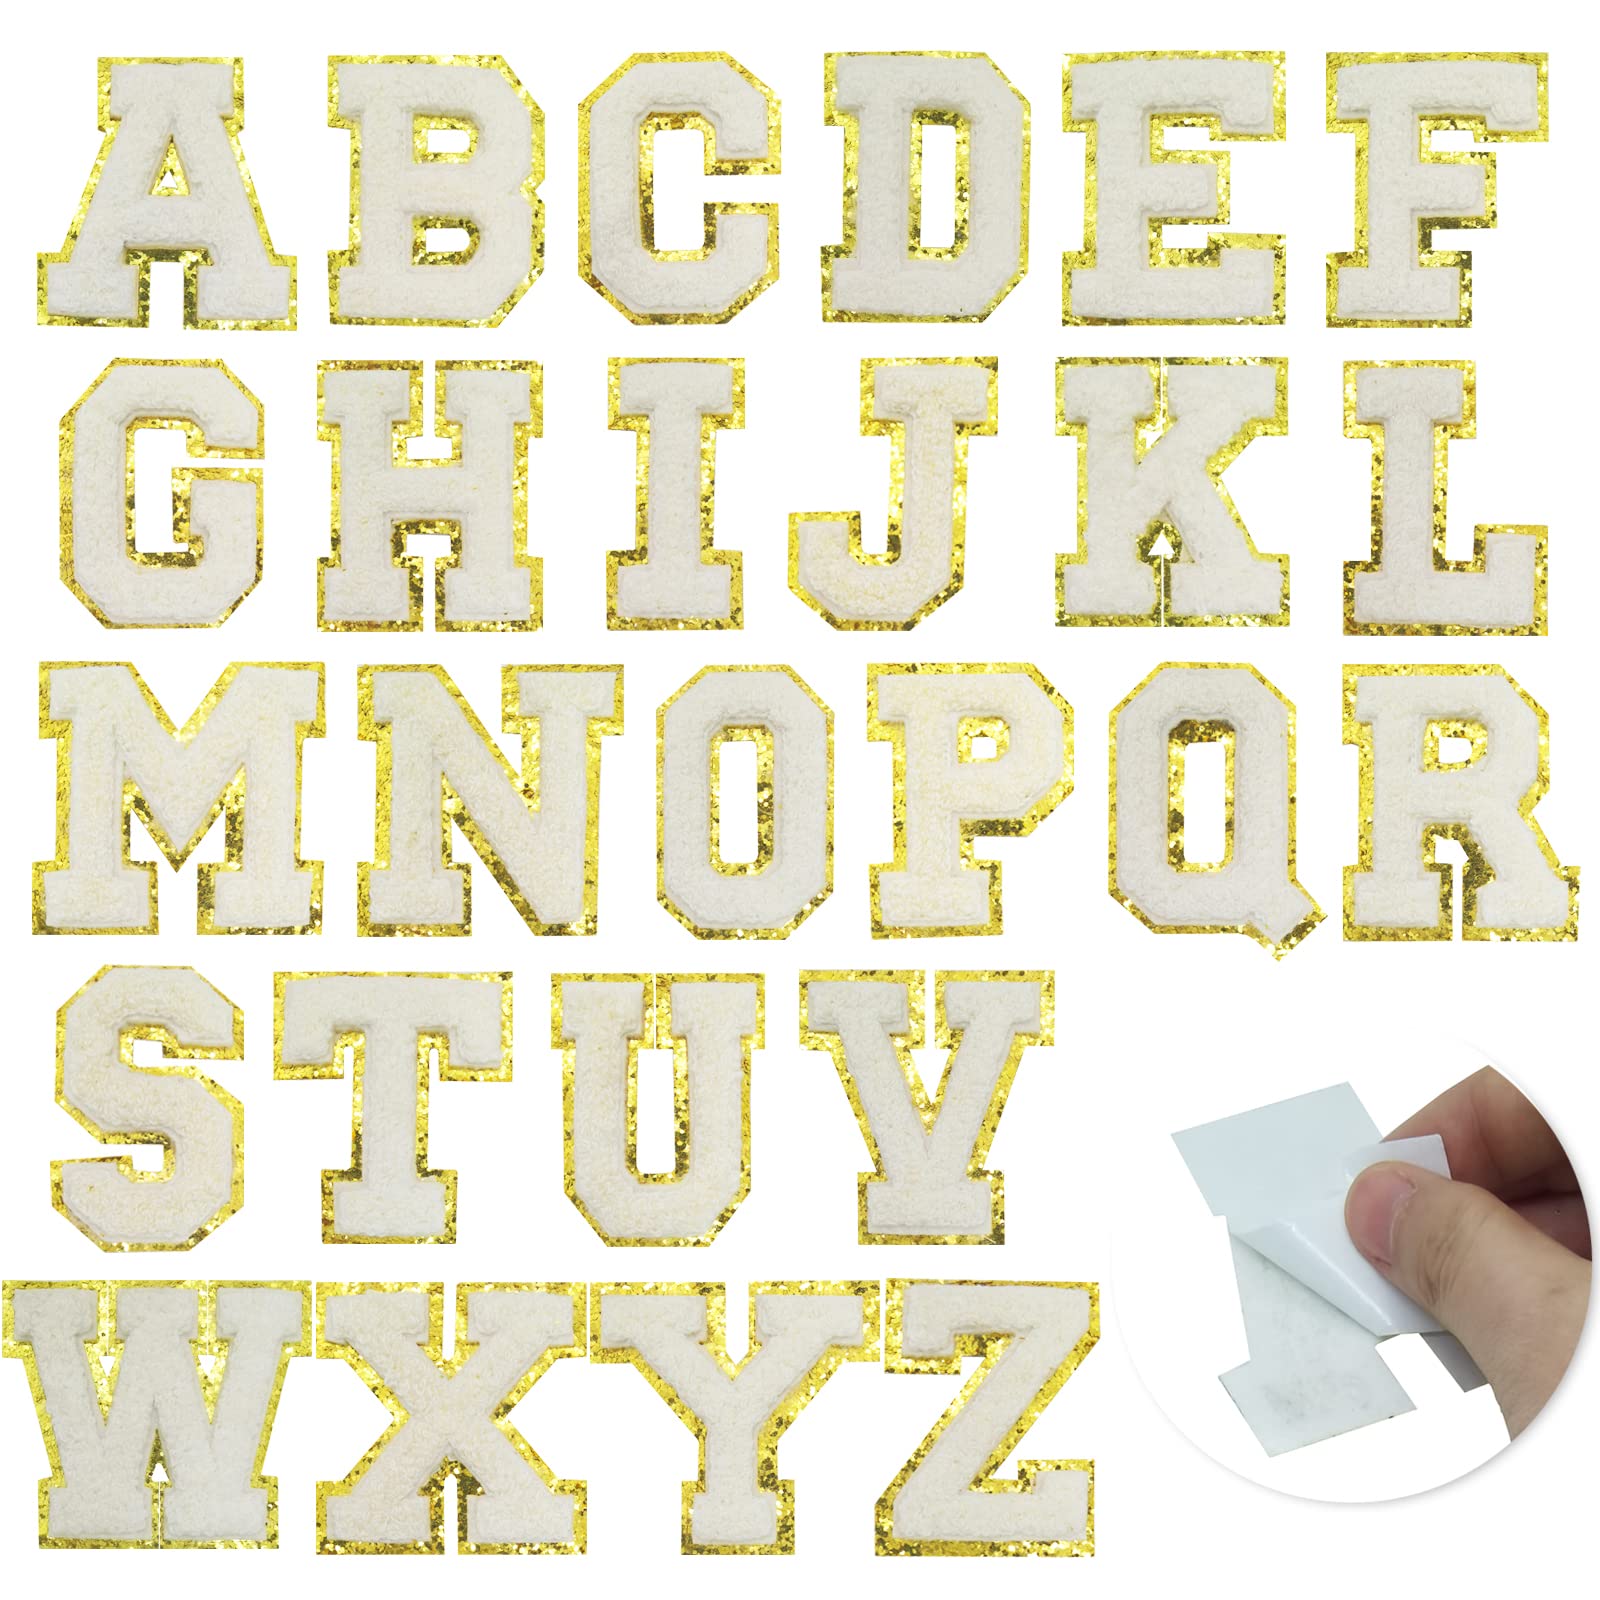 White Self Adhesive Chenille Letters Patches 